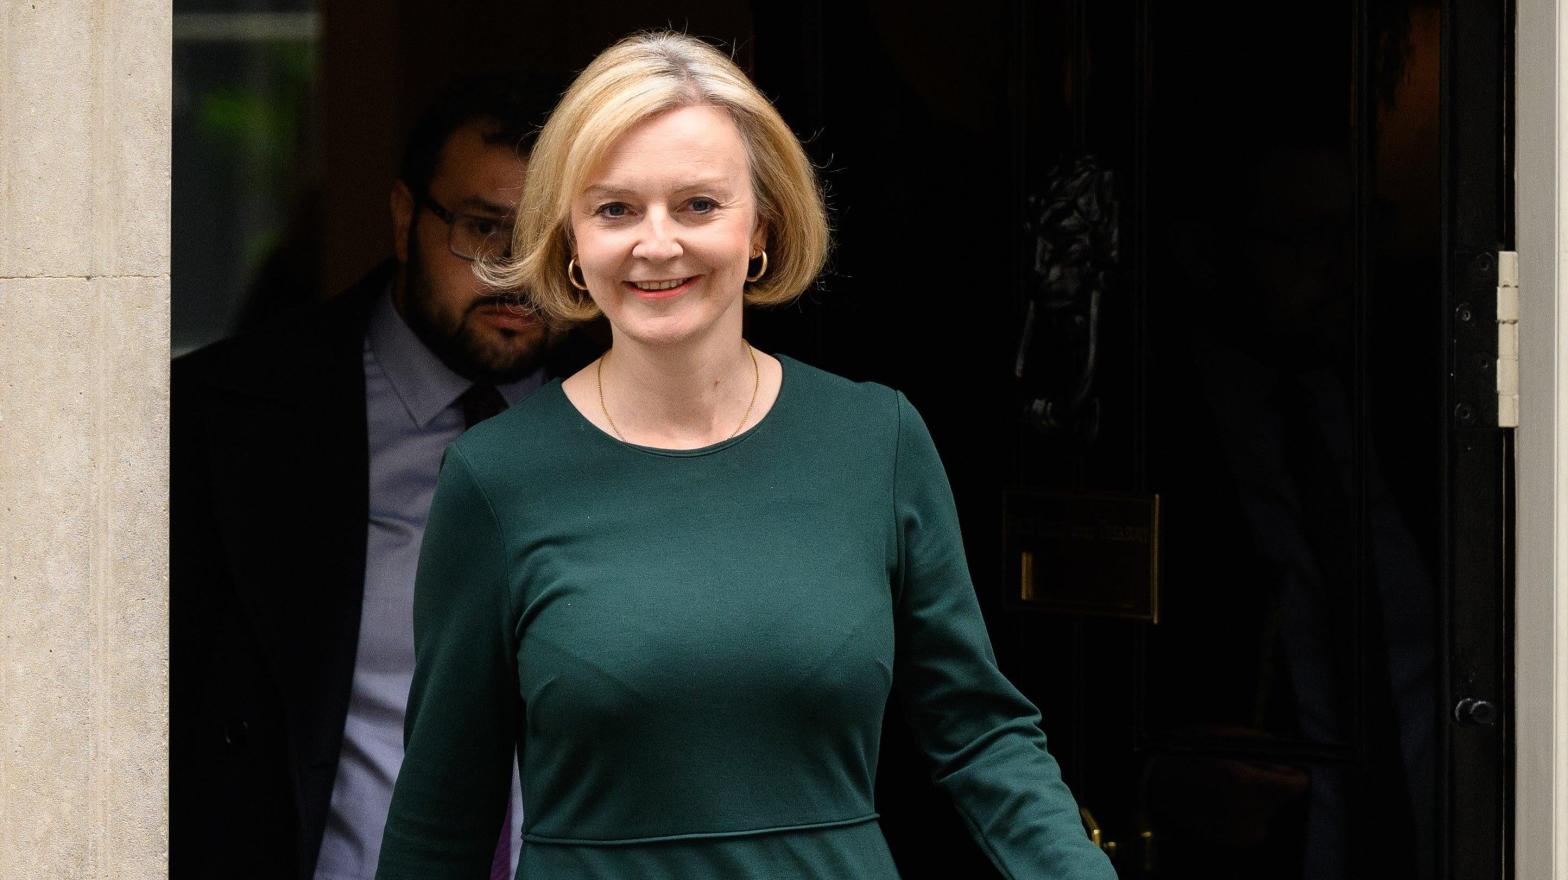 UK Prime Minister Liz Truss leaves number 10 Downing Street on October 12, 2022 in London, England. (Photo: Leon Neal, Getty Images)